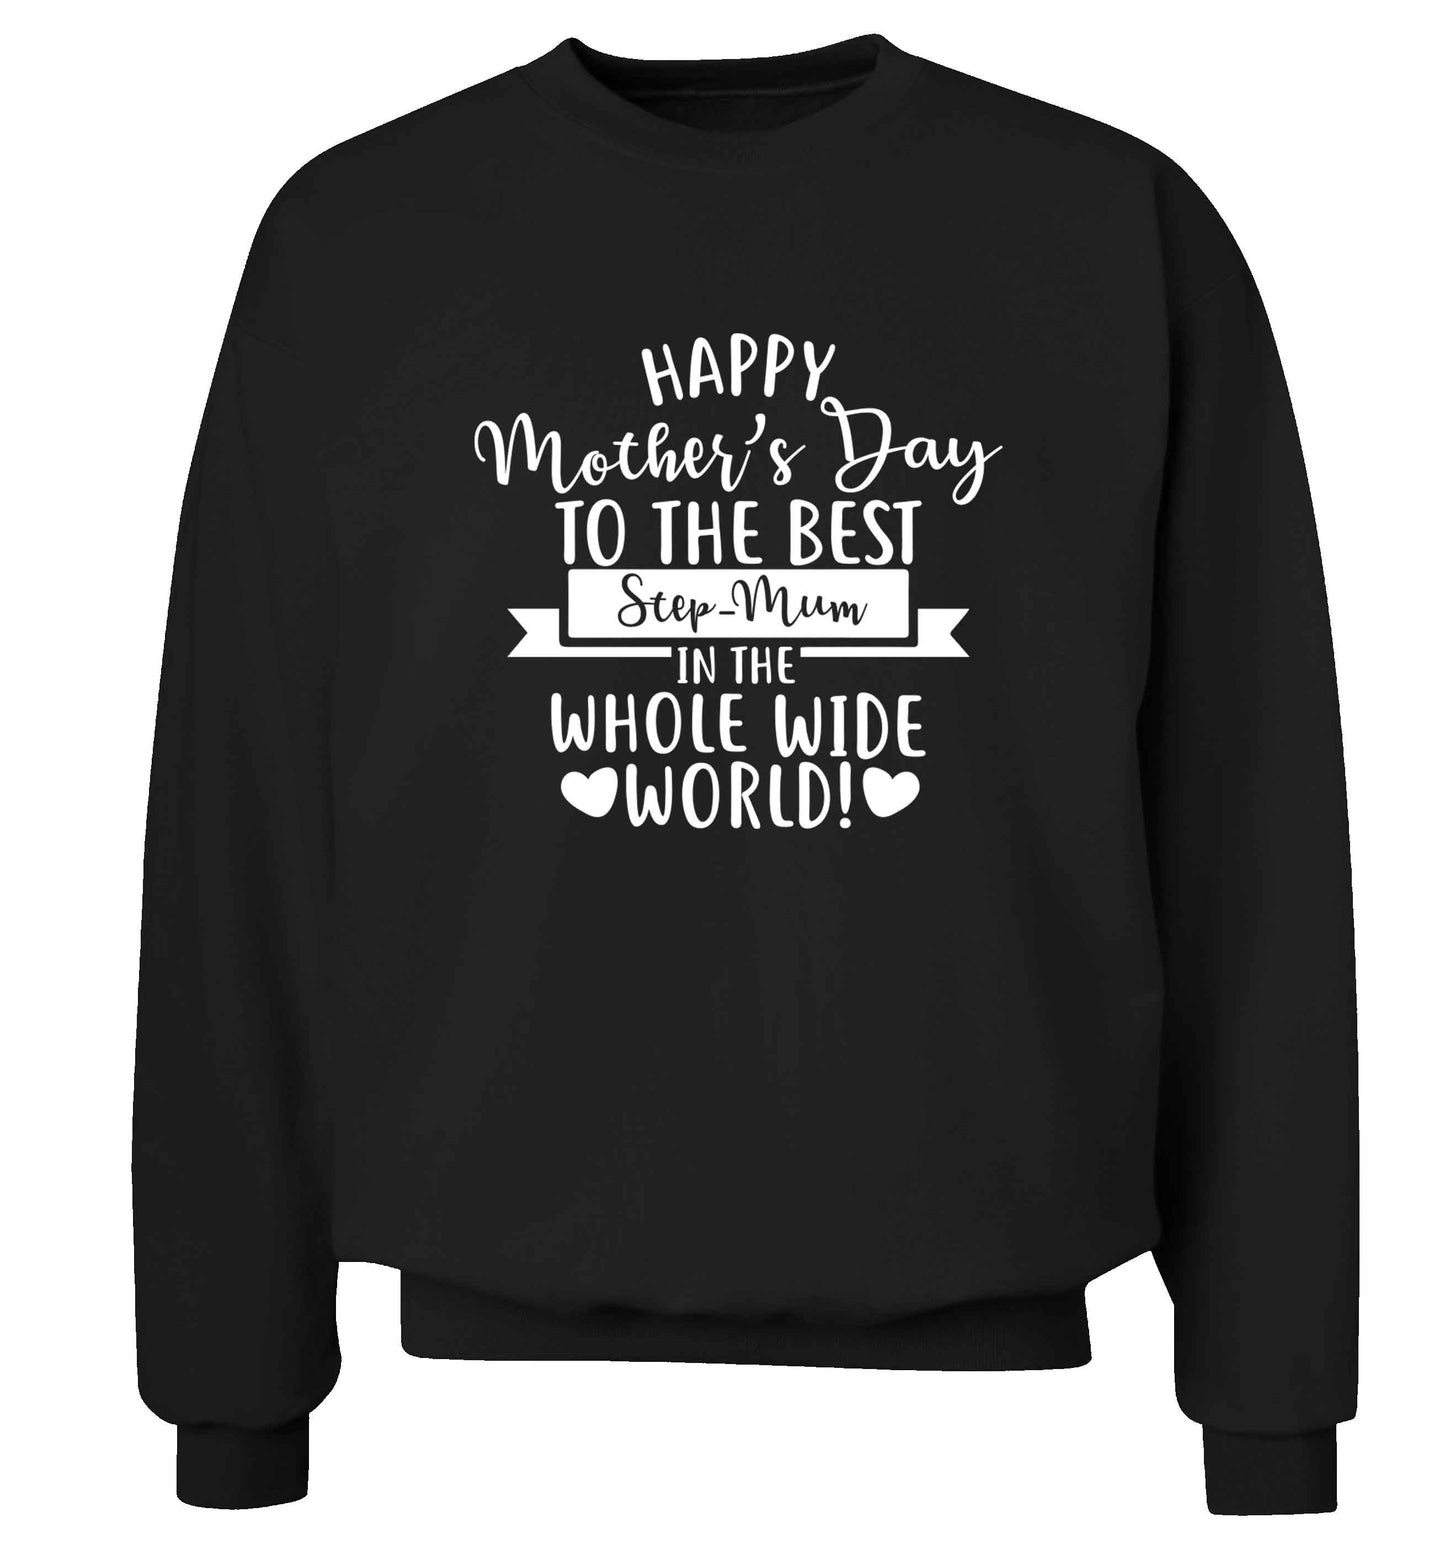 Happy mother's day to the best step-mum in the world adult's unisex black sweater 2XL